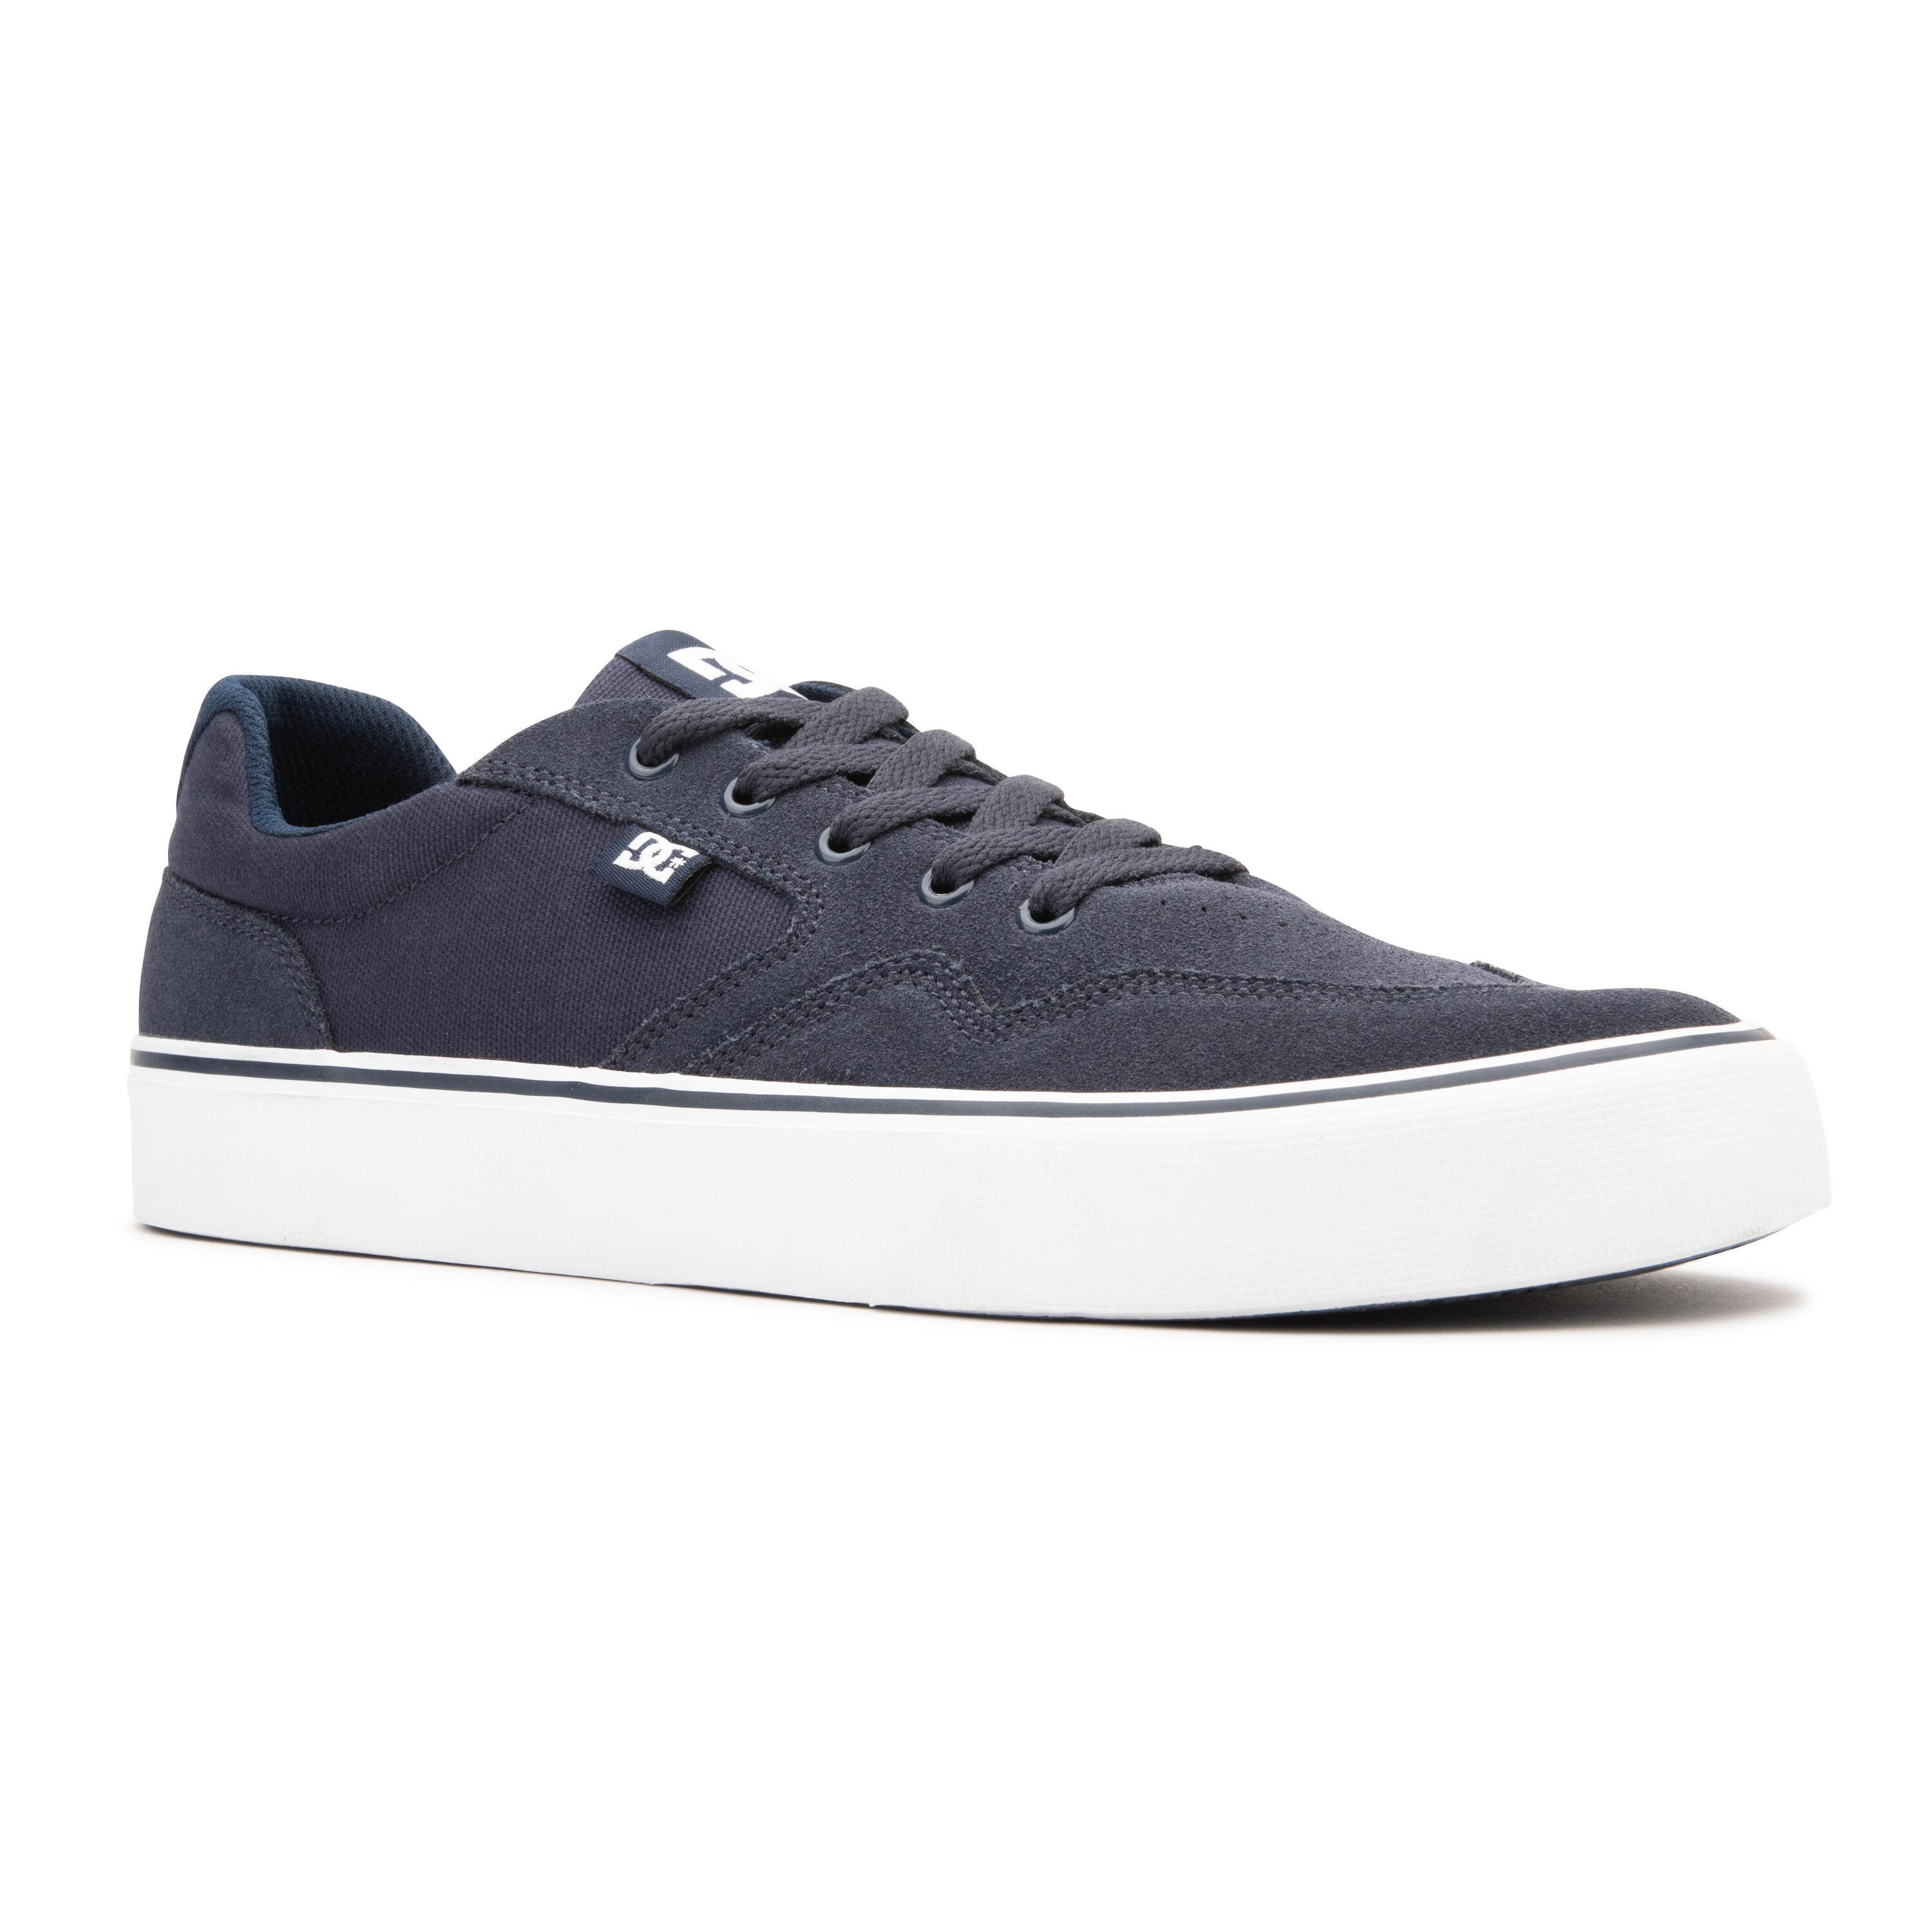 Adult Skate Shoes Rowlan - Blue 1/11